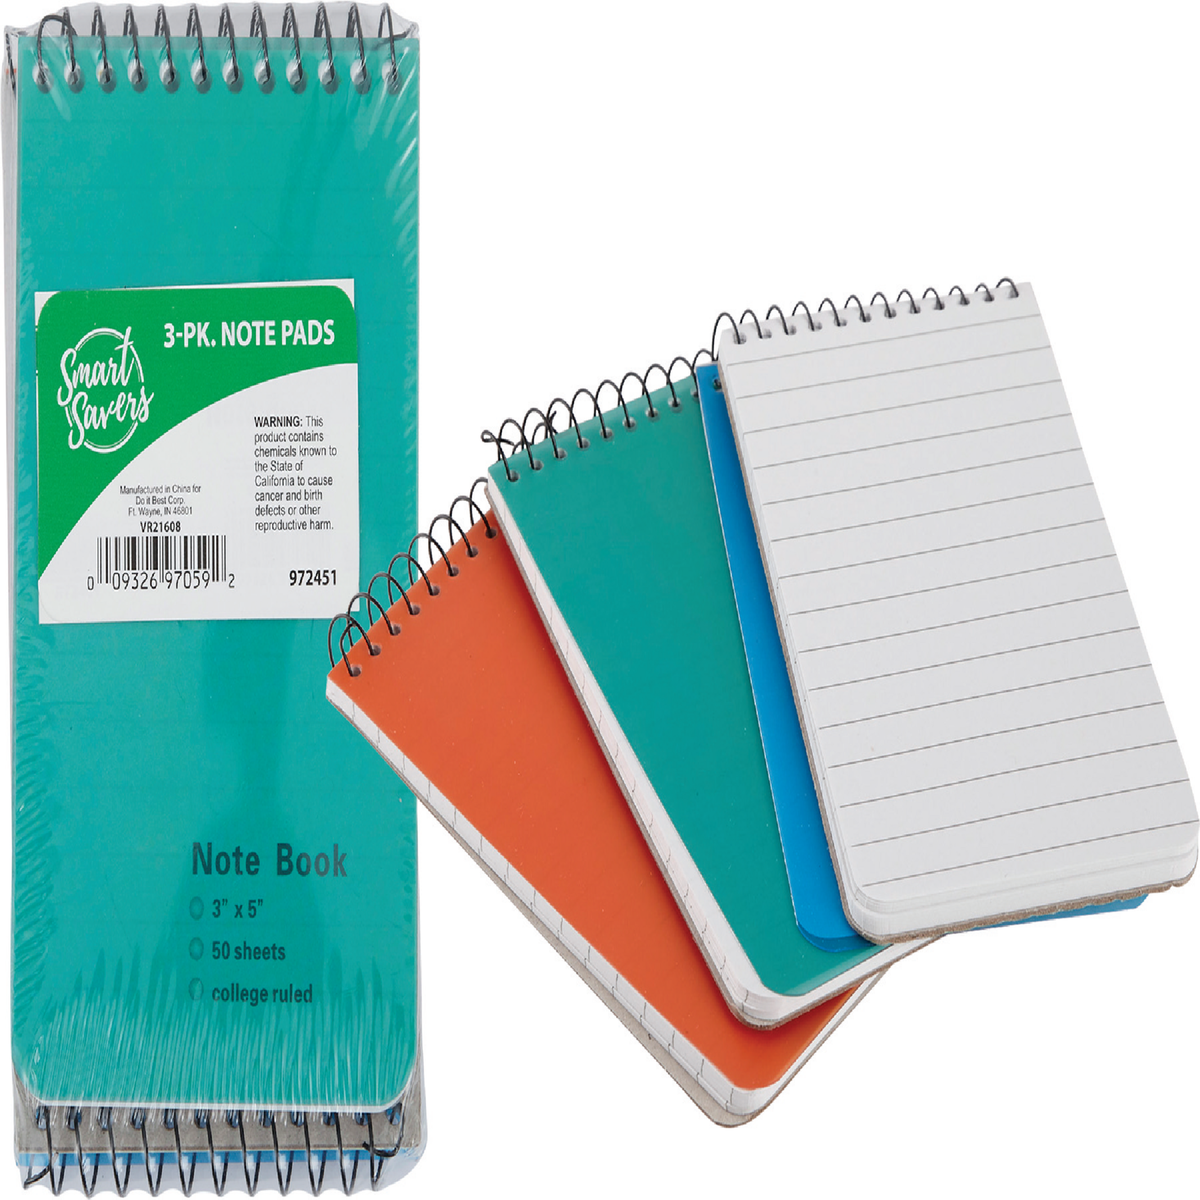 Notebooks, Writing Pads & Paper